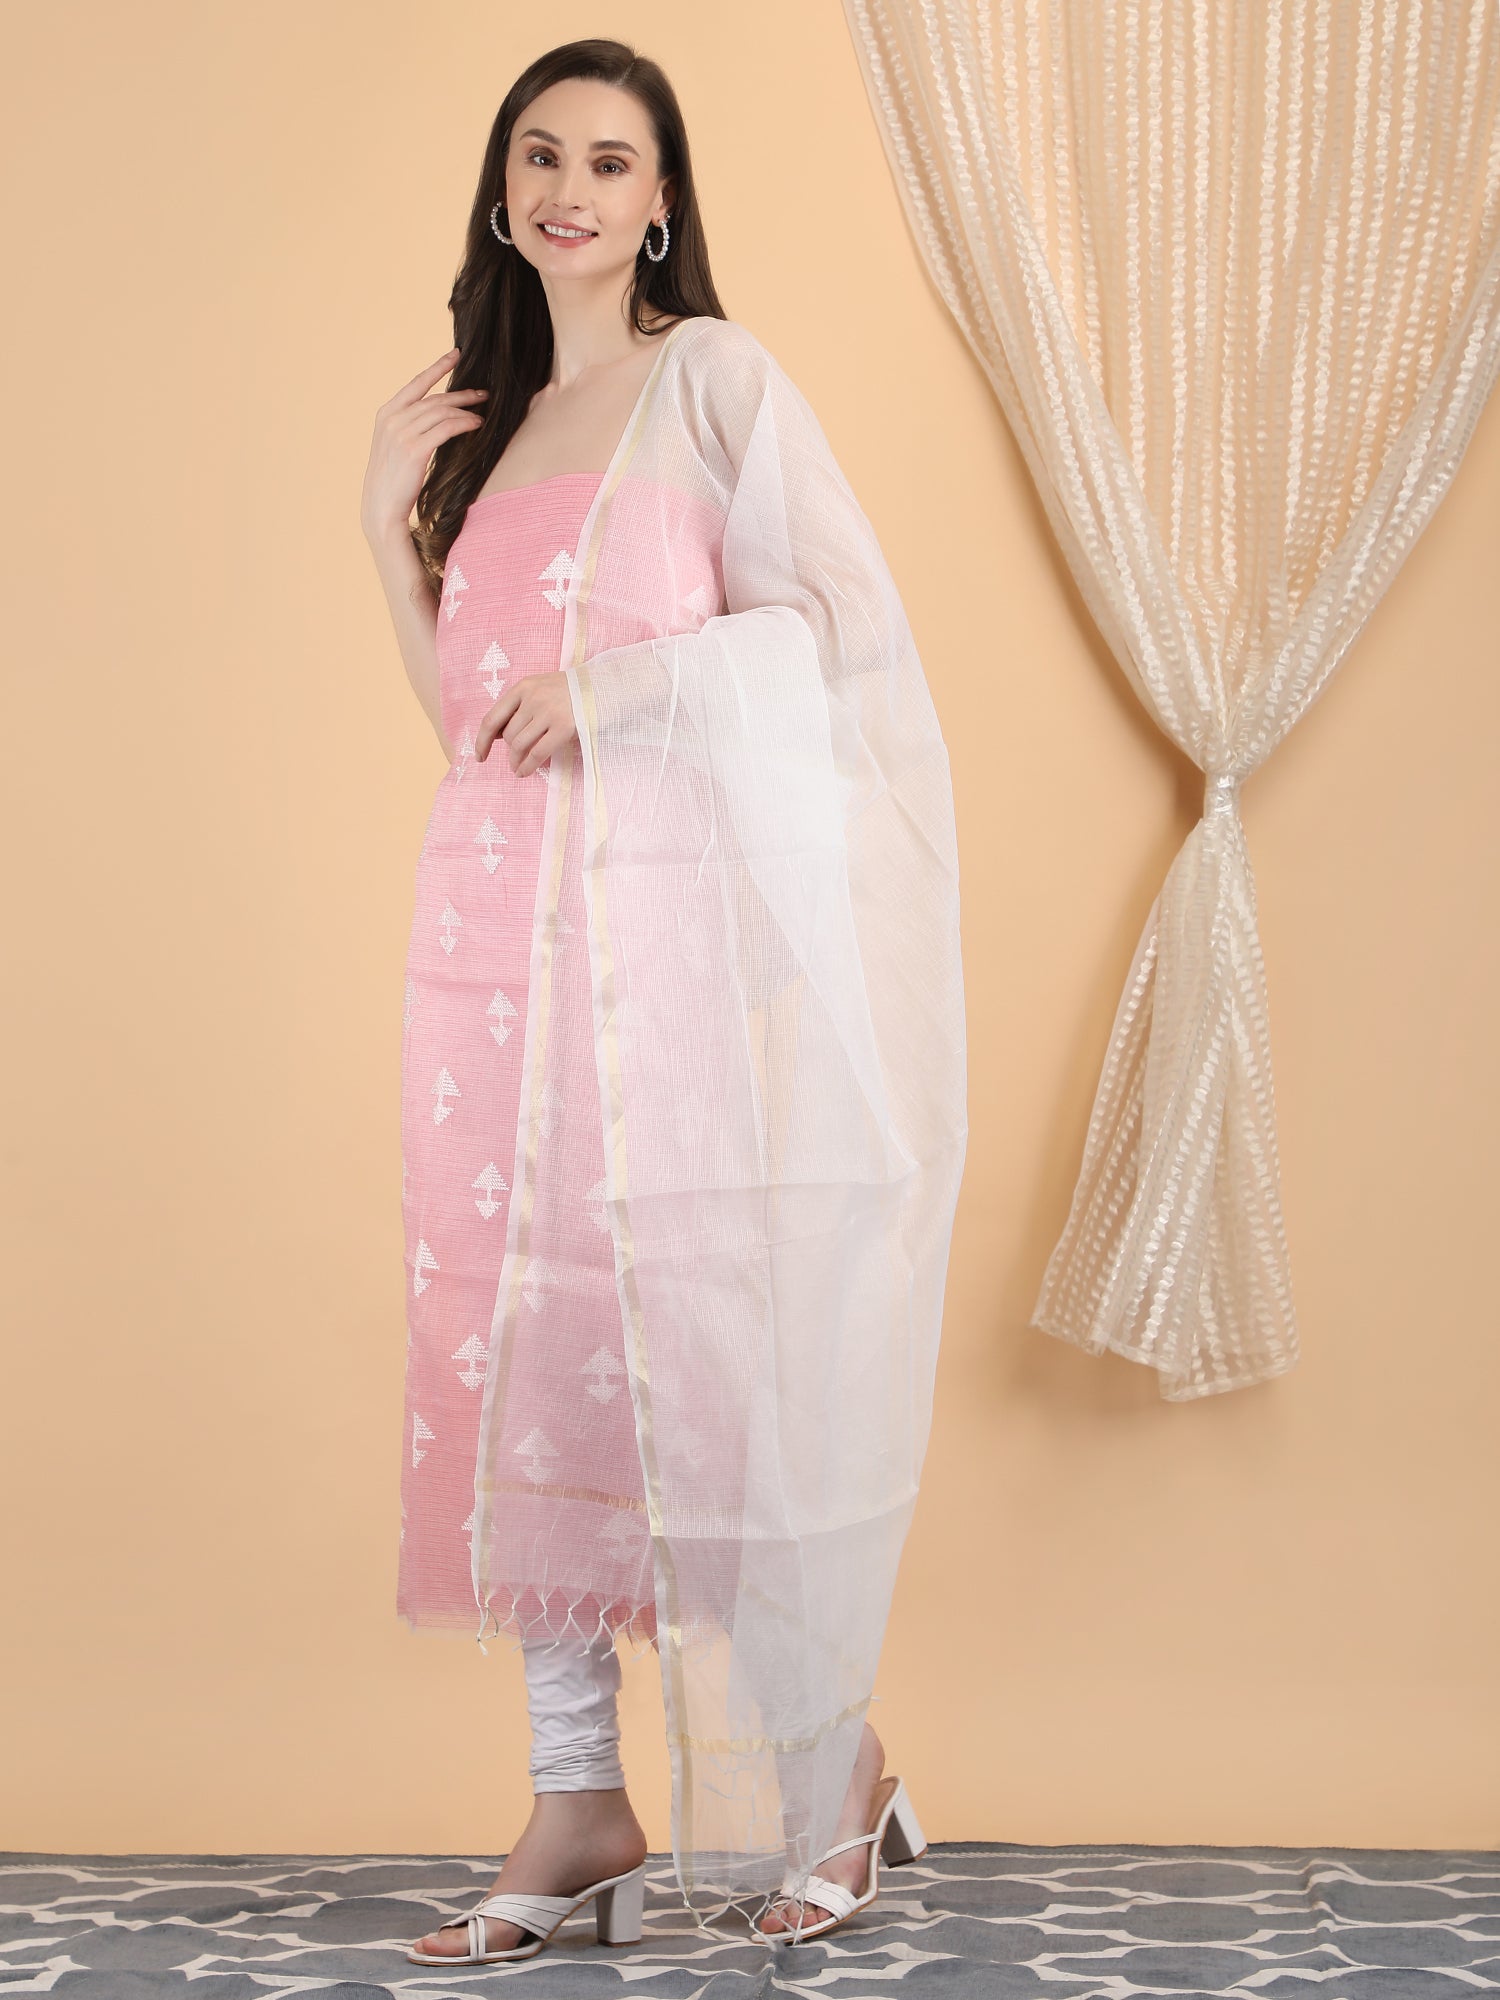 Women's Pink Color and White Embroidery Unstitched Suit and Matching Dupatta set - Kora Doria Cotton, ideal for Summers